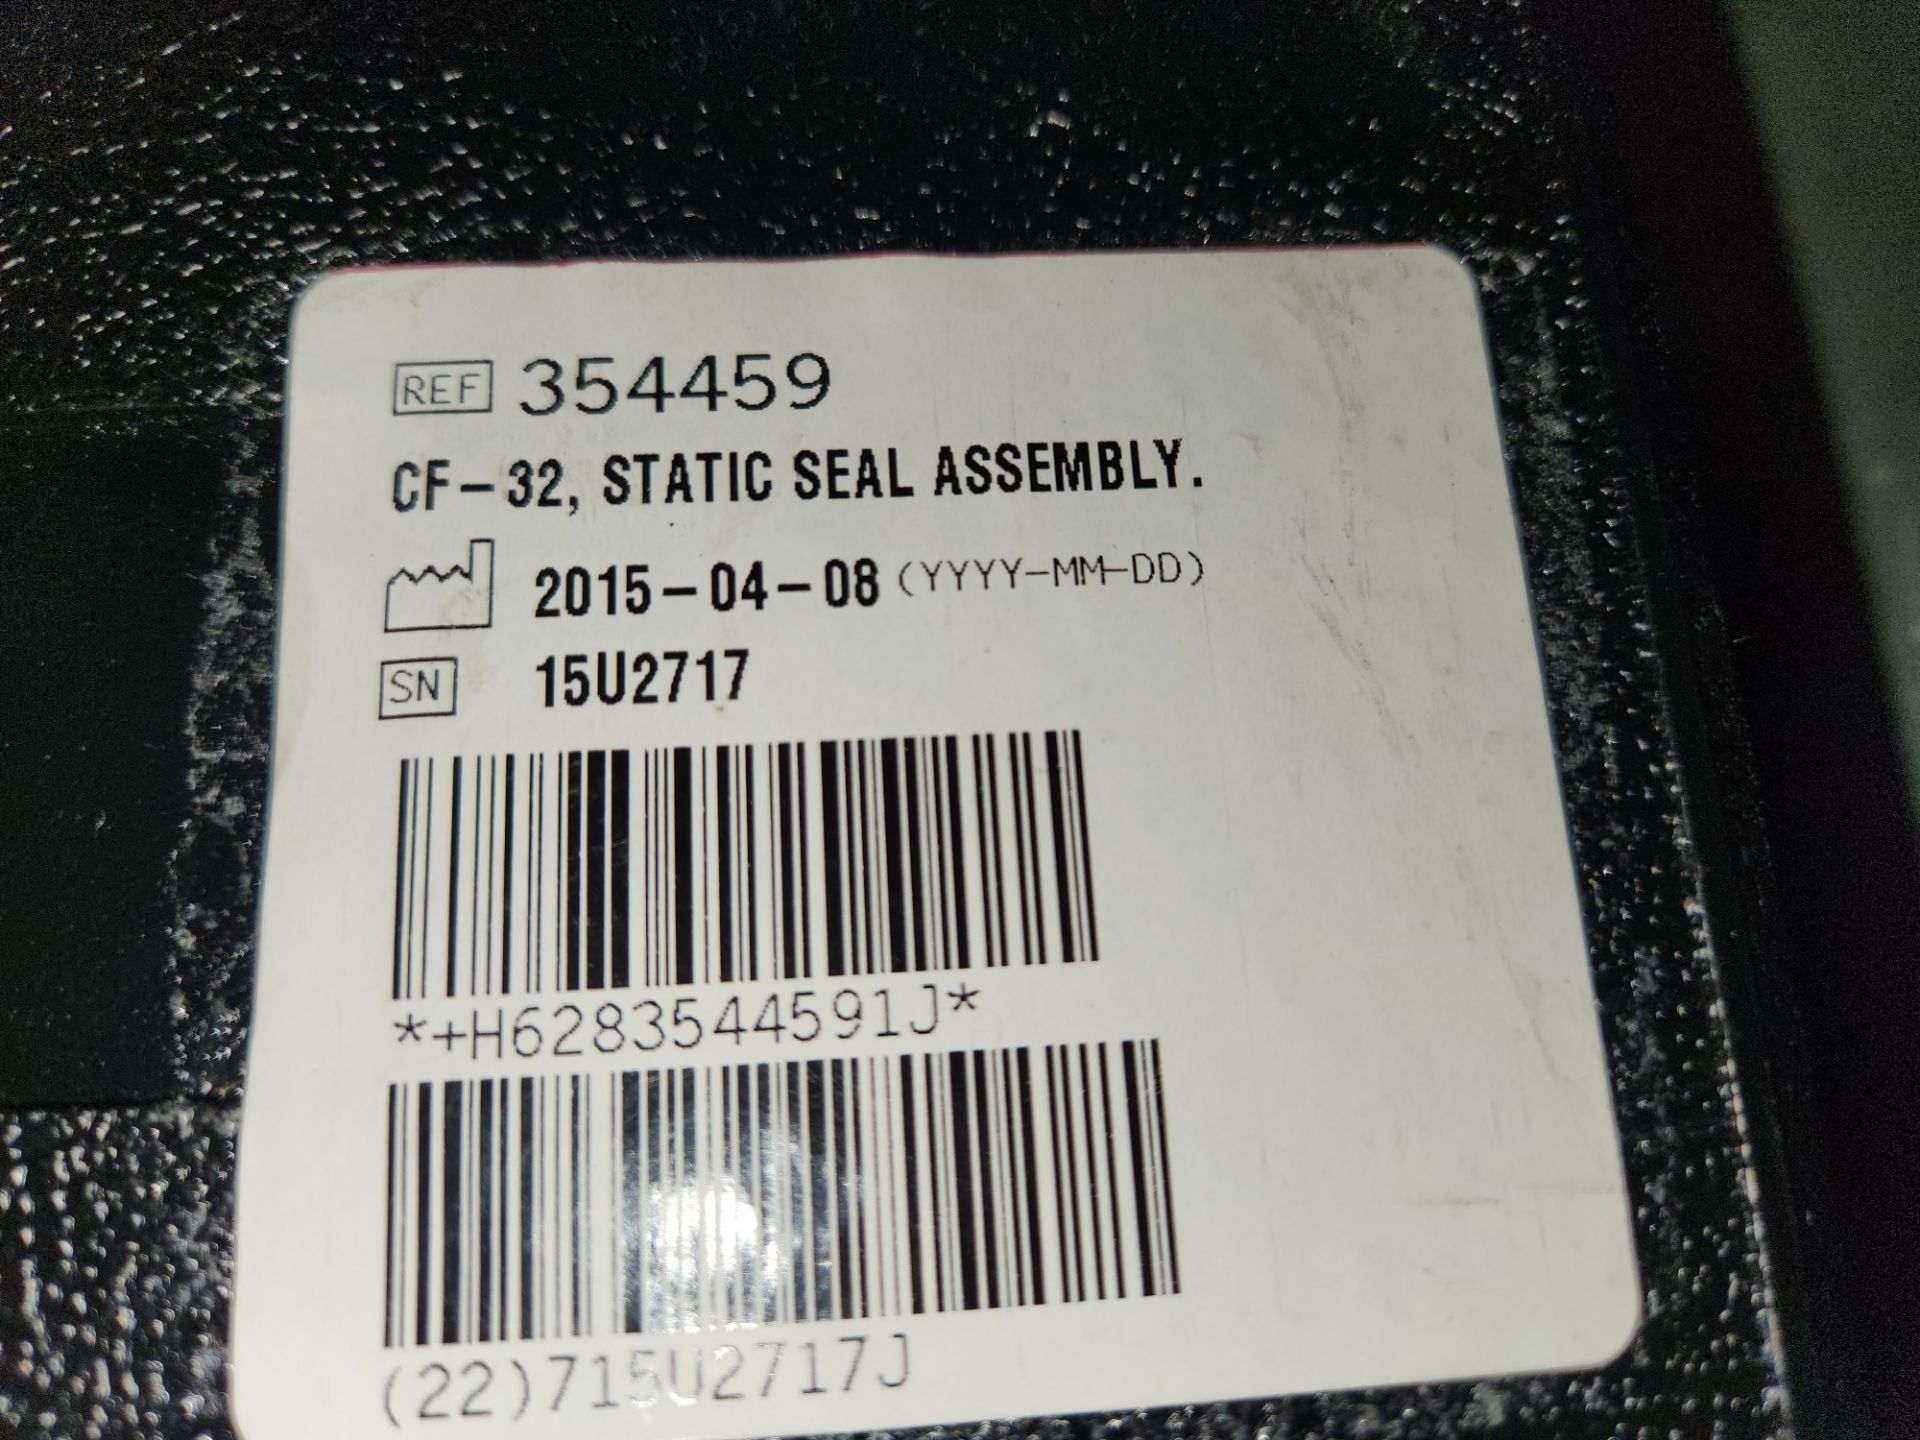 Stem/Bearing Assembly & Static Seal Assembly {Loading Fee…$25.00) - Image 2 of 4